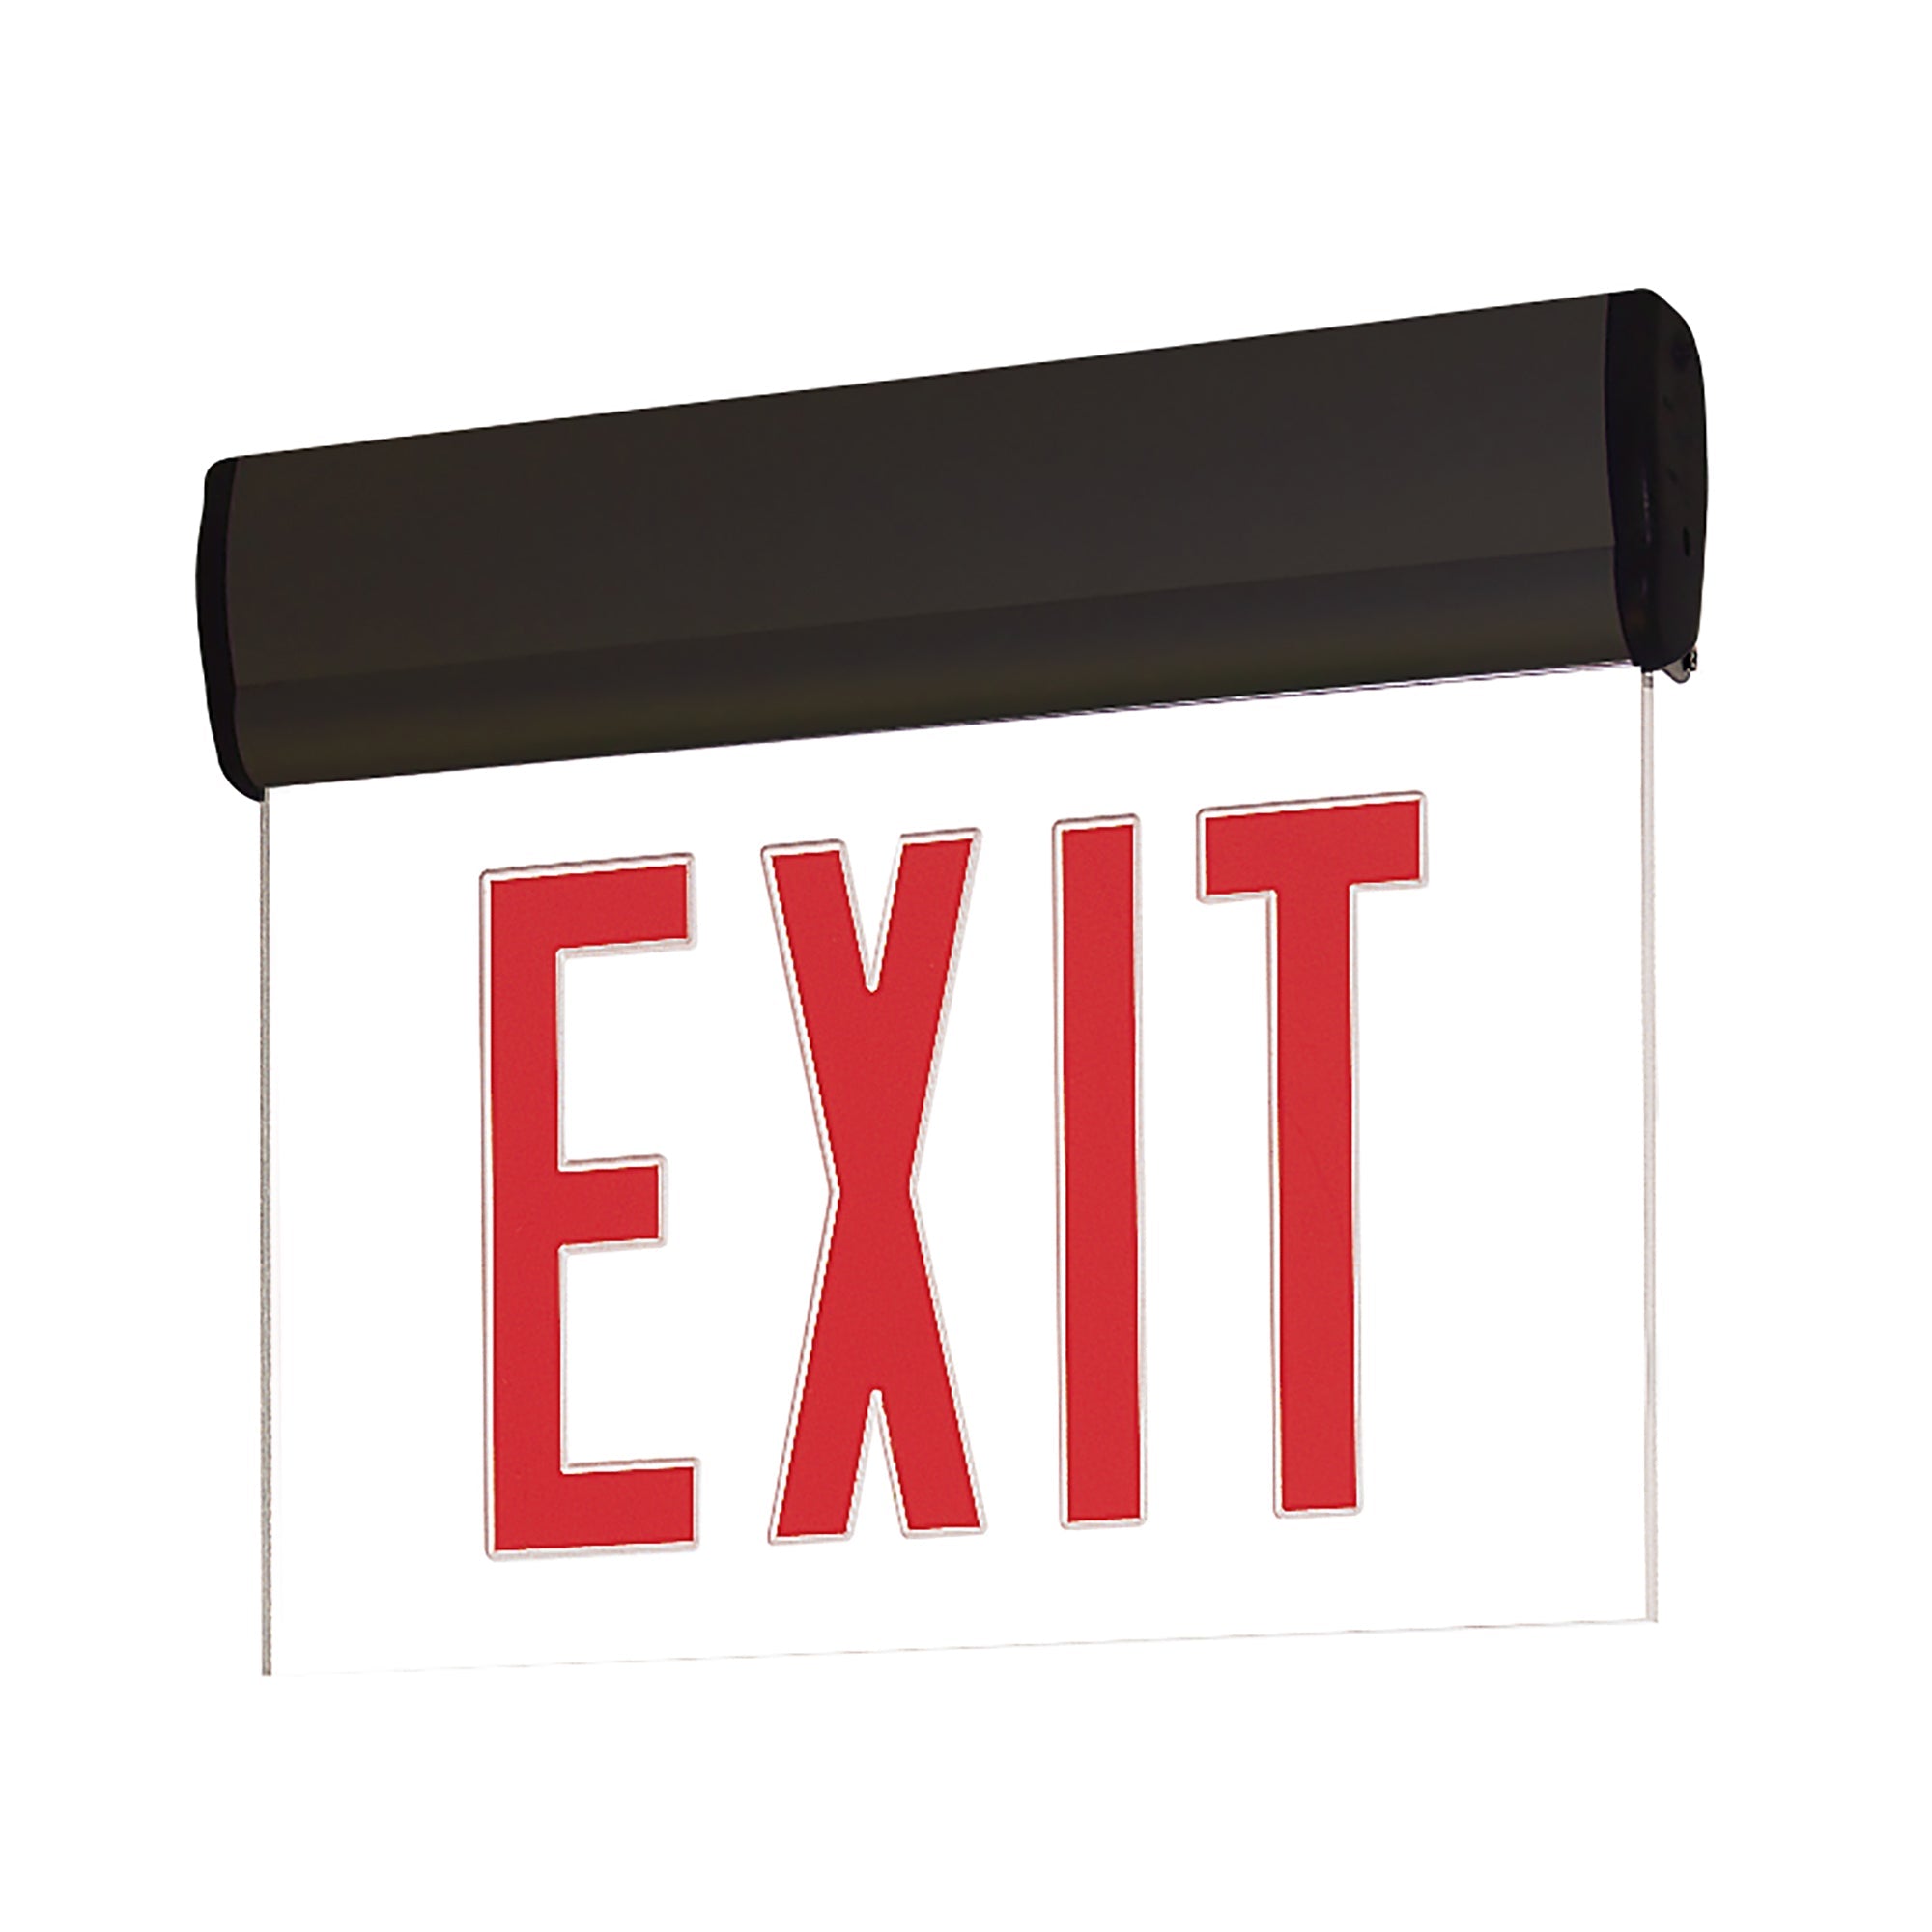 Nora Lighting NX-812-LEDRCB - Exit / Emergency - Surface Adjustable LED Edge-Lit Exit Sign, Battery Backup, 6 Inch Red Letters, Single Face / Clear Acrylic, Black Housing